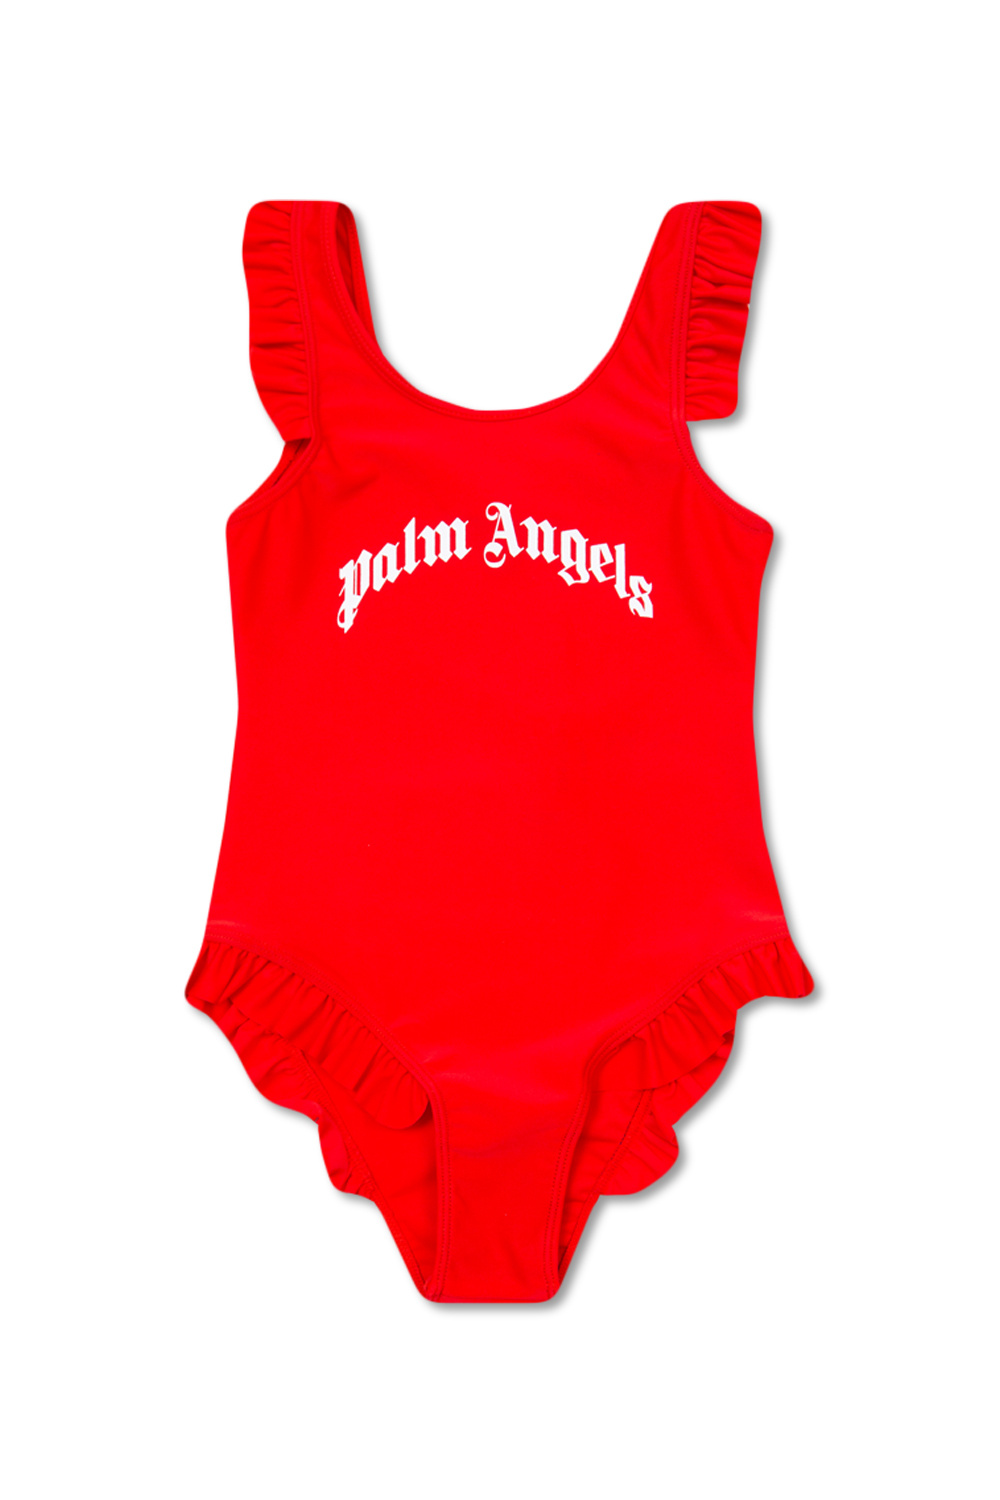 PALM ANGELS KIDS ONE-PIECE SWIMSUIT One-piece swimsuit